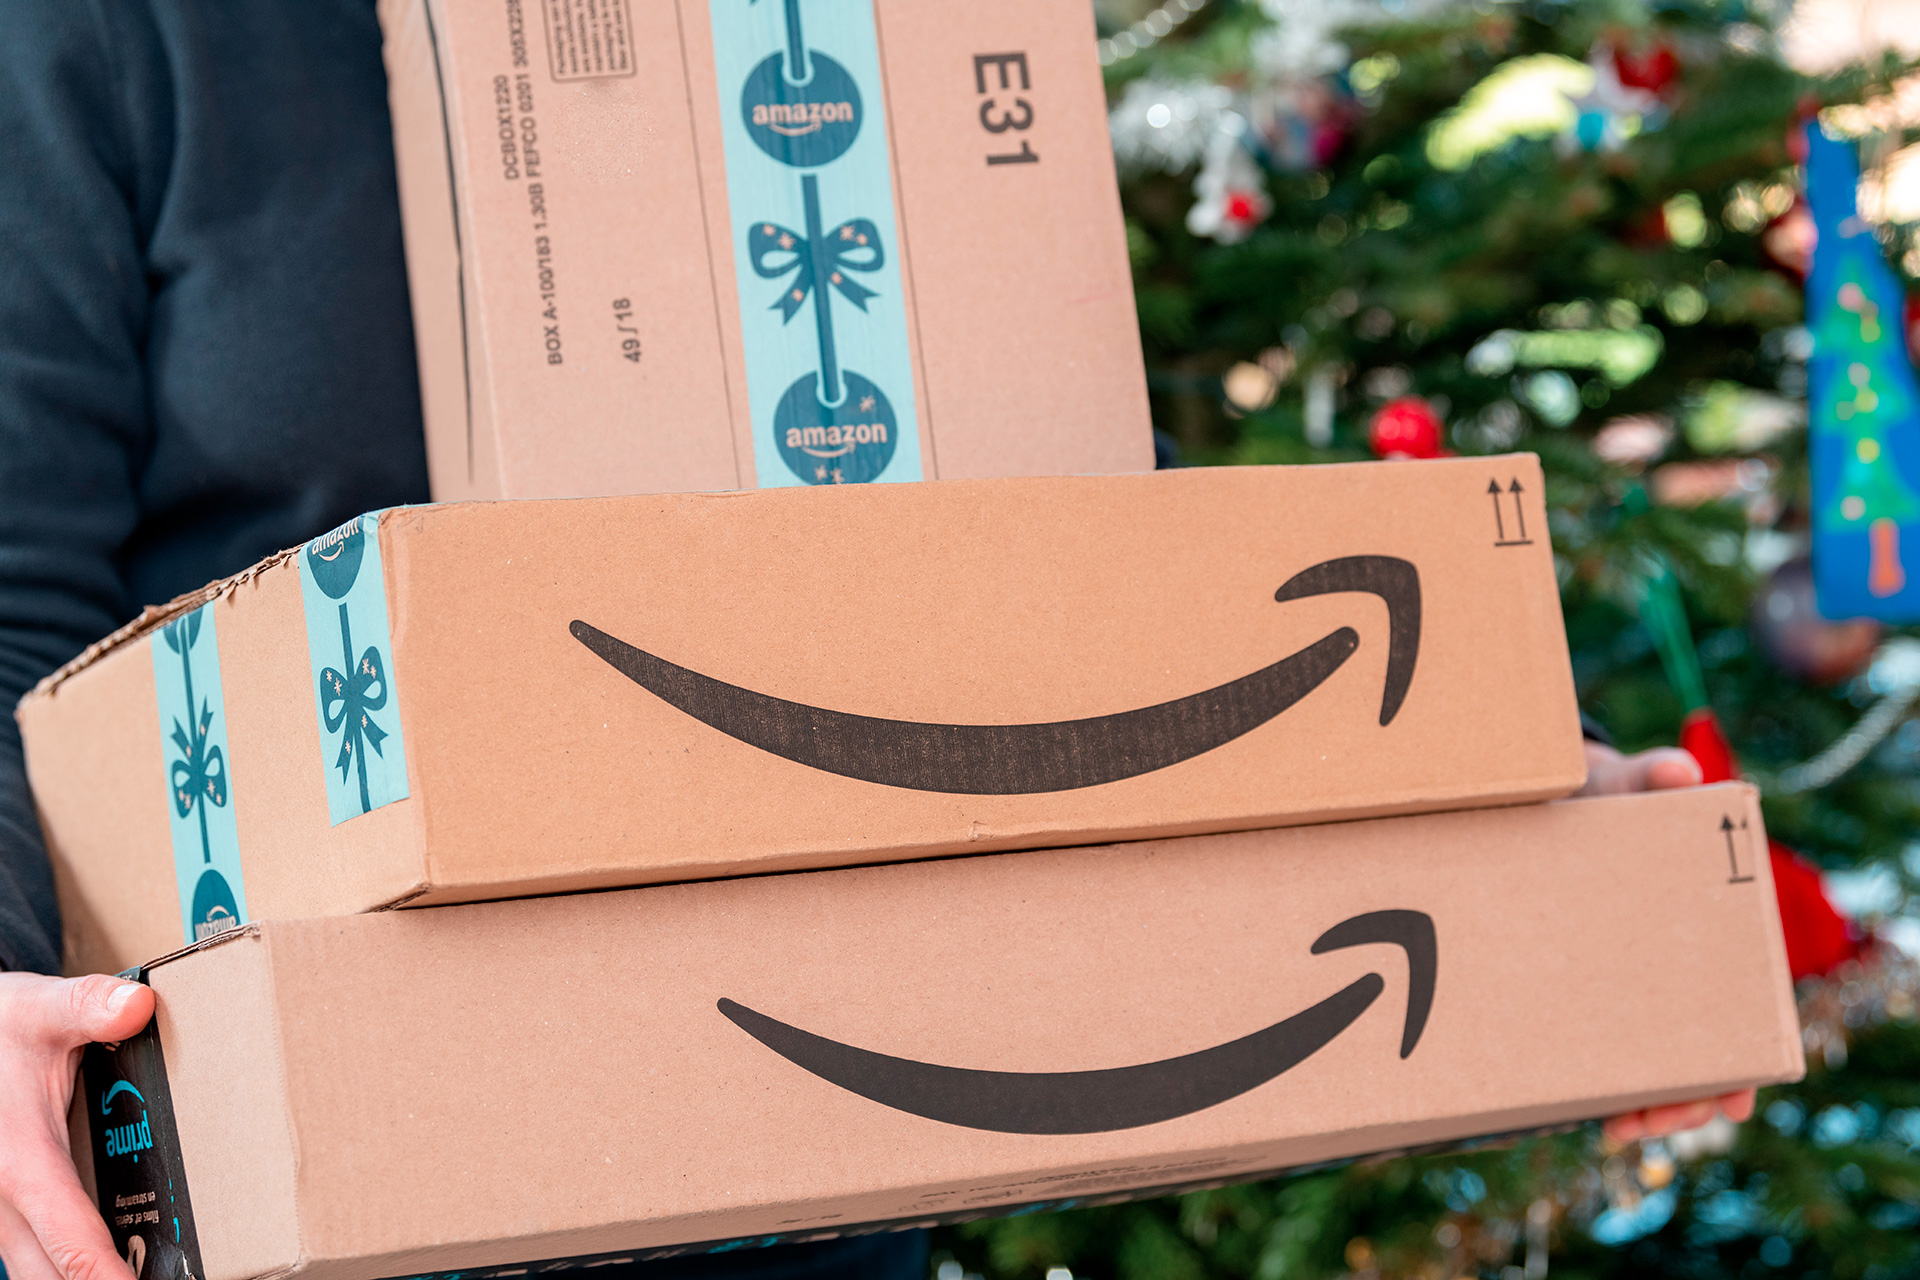 An Amazon Prime package delivered to a residential home for christmas